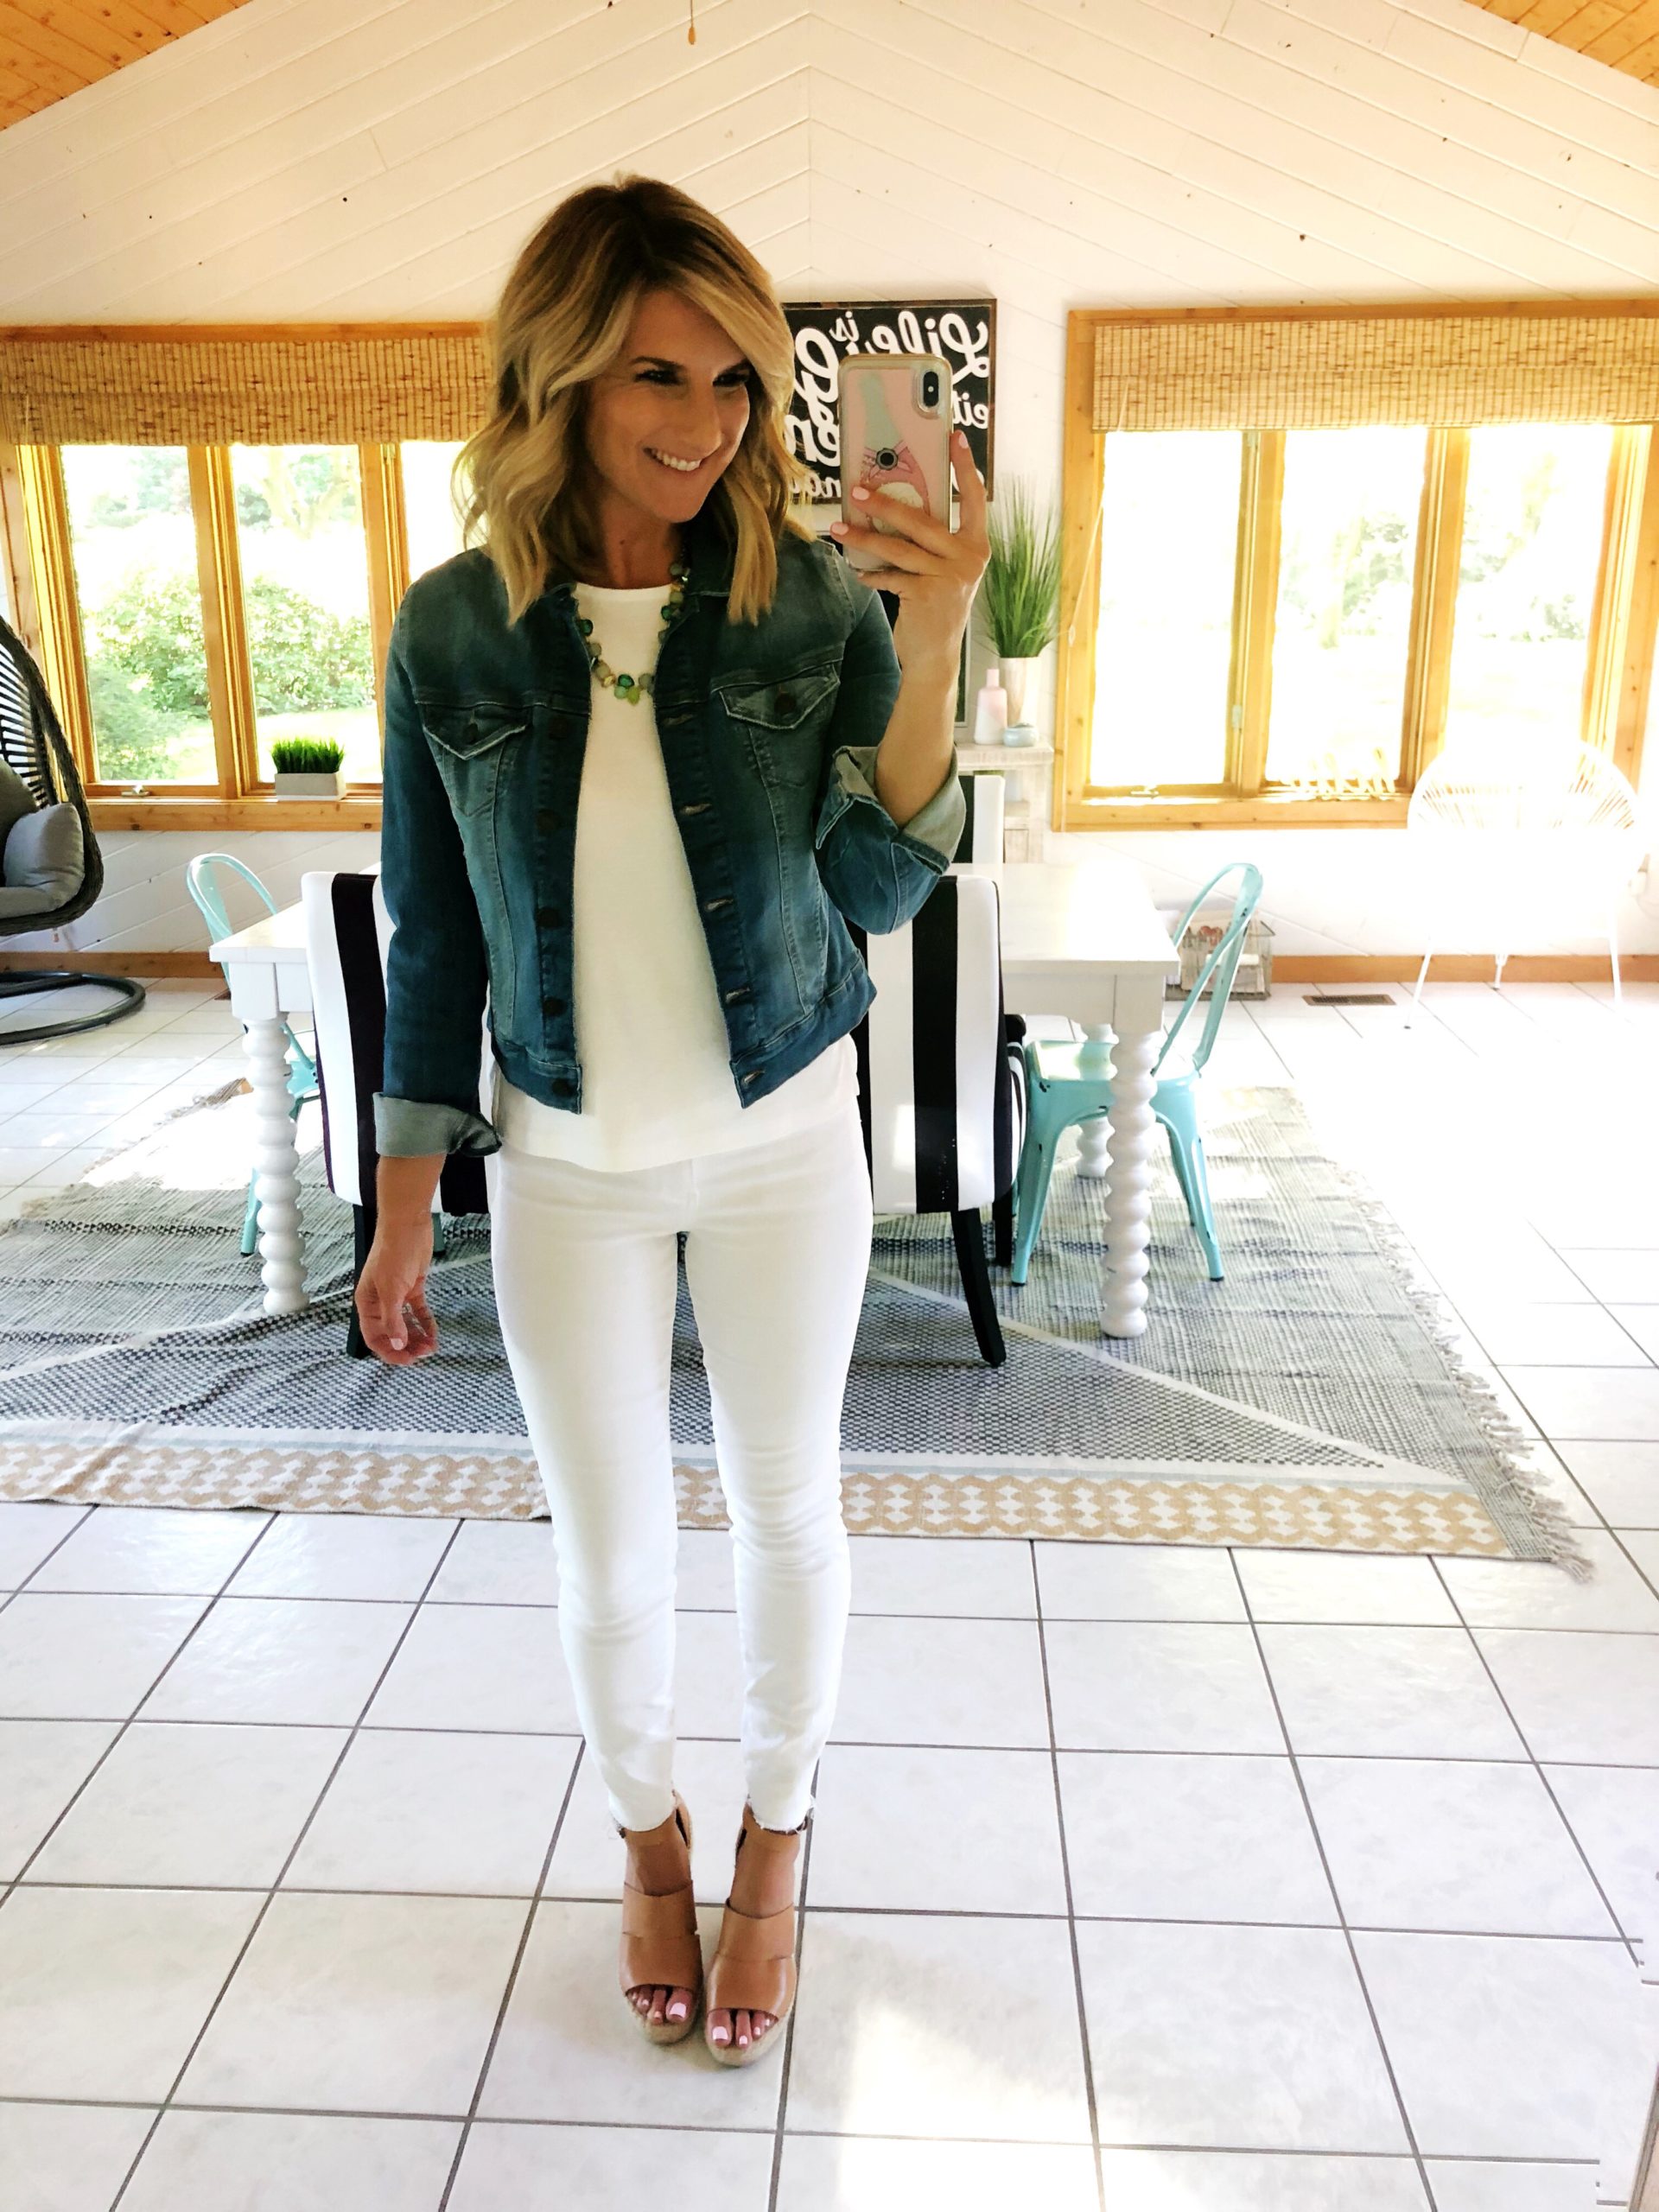 How to wear a white top and white jeans // What to wear with a denim jacket // non sheer white jeans // affordable outfit